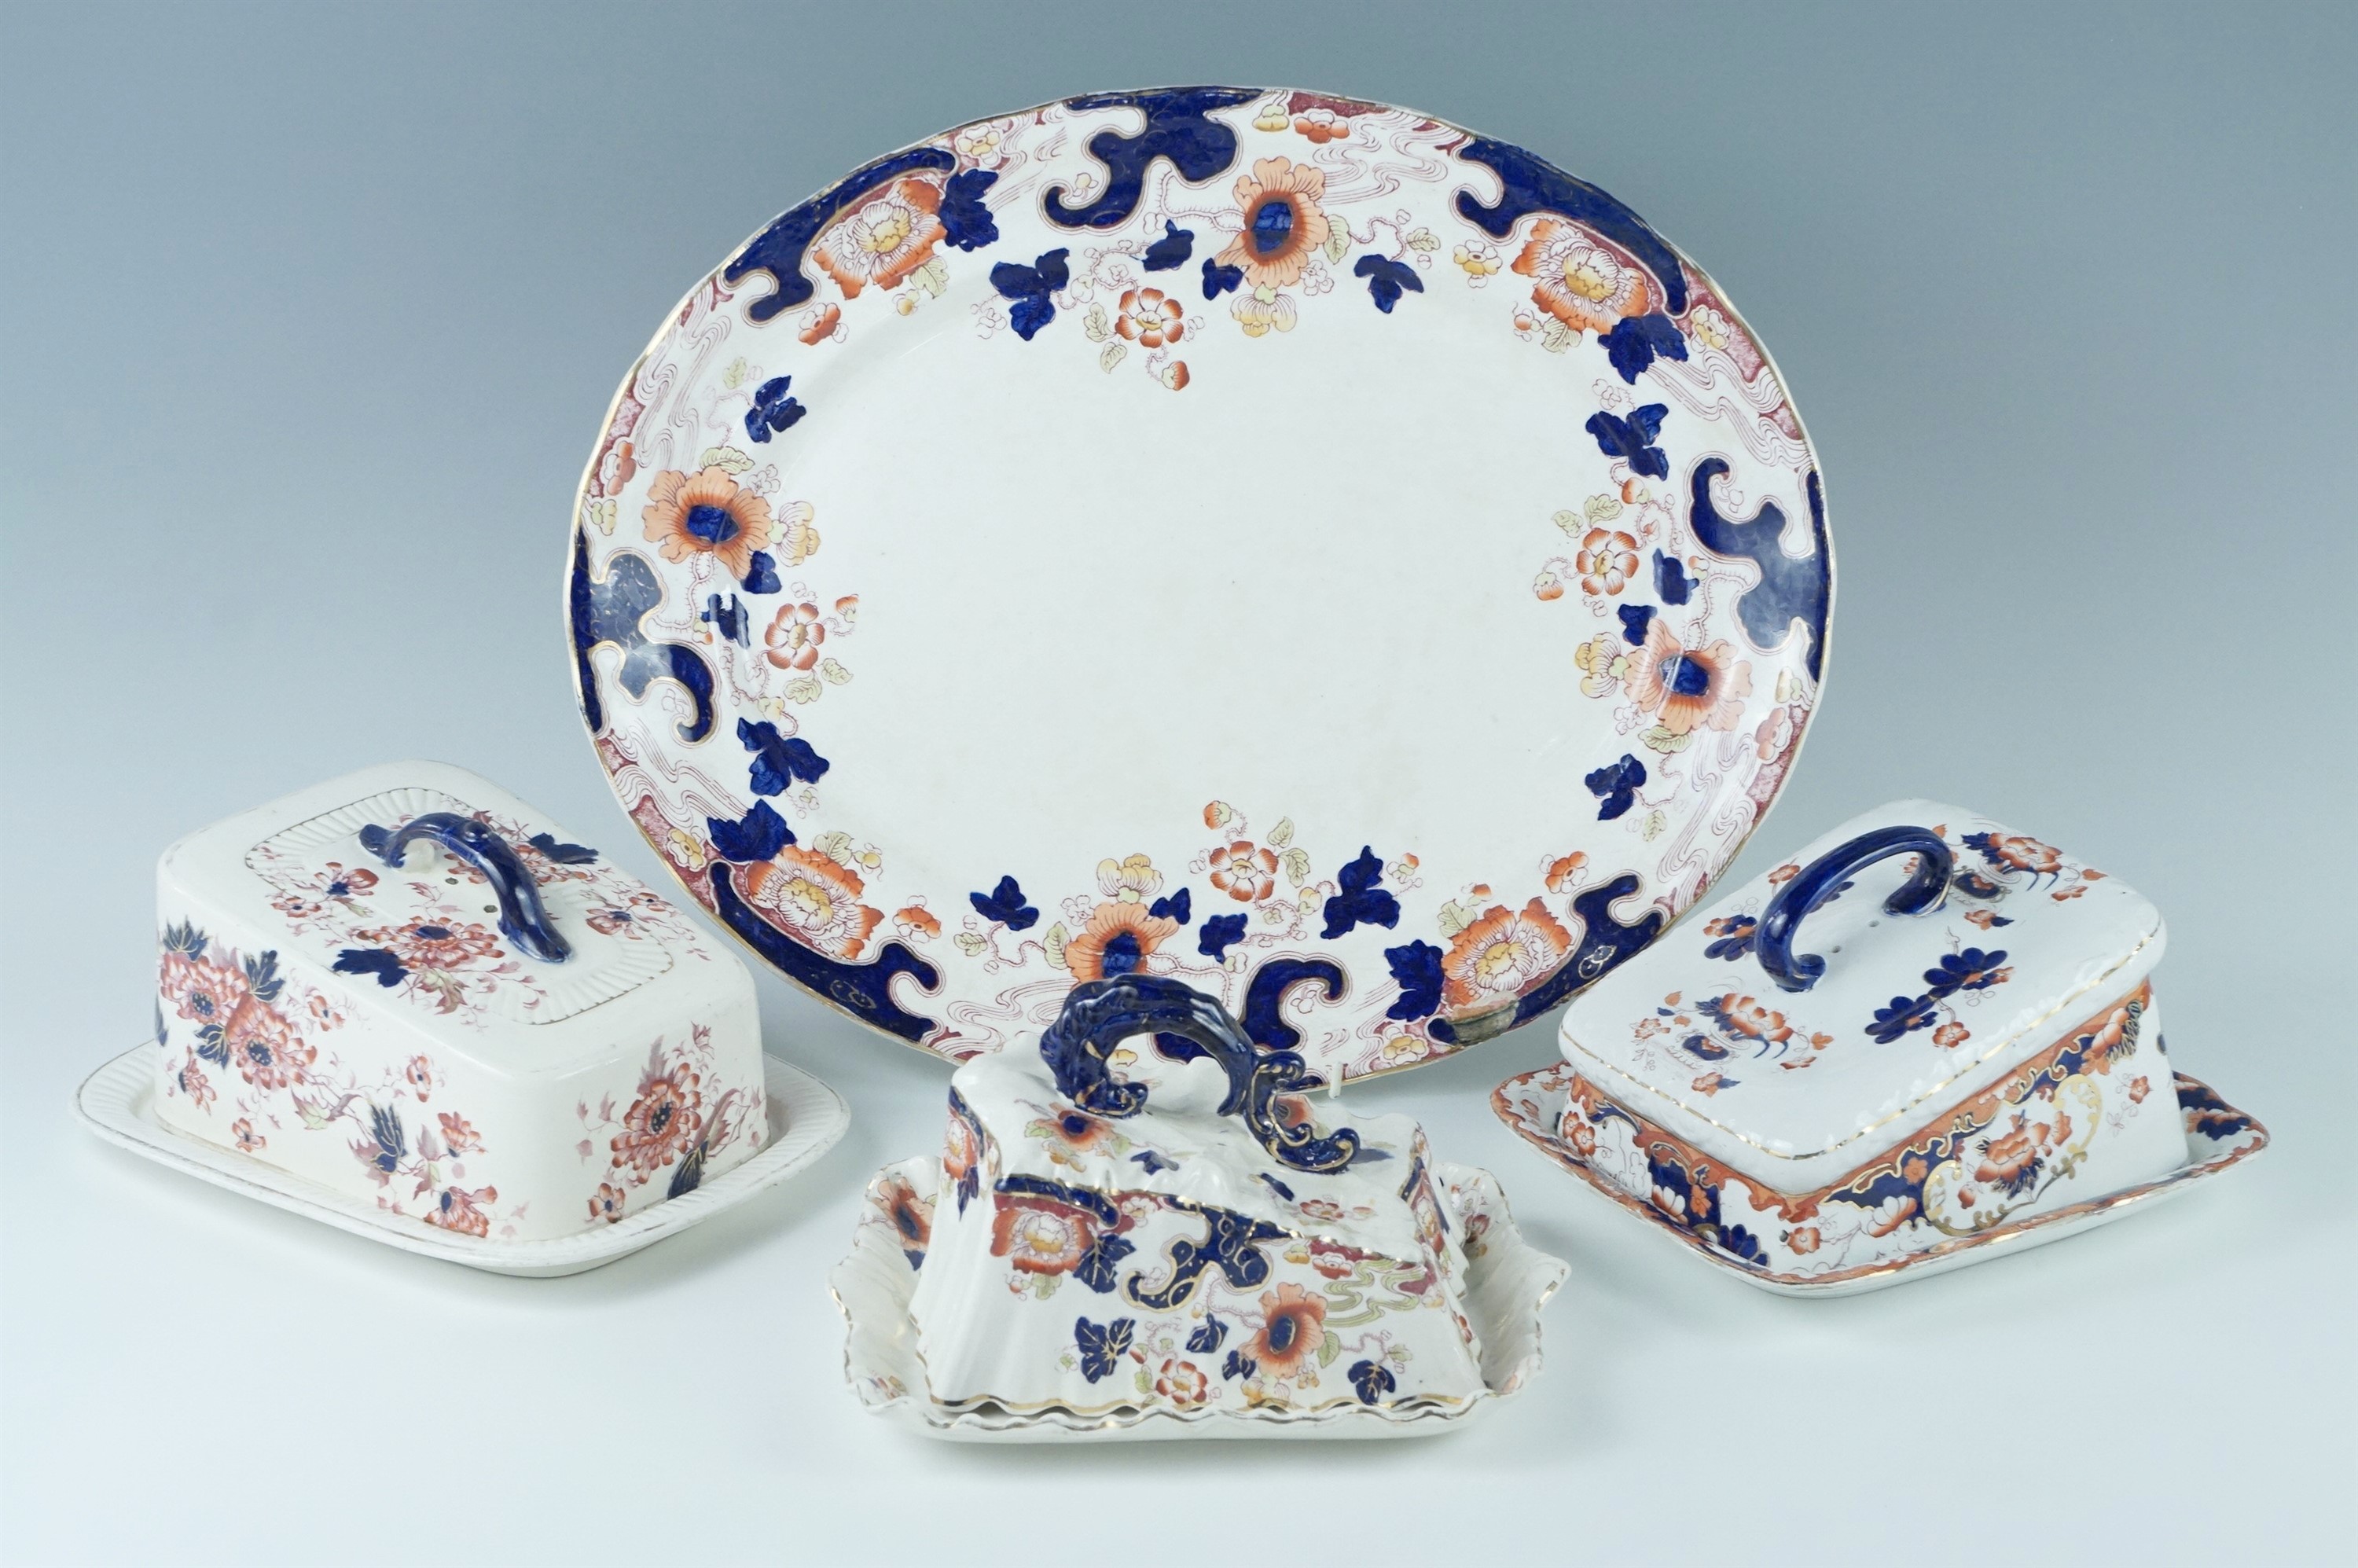 A quantity of Keeling & Co ceramics including Tokio pattern cheese dish and meat plate, Aster